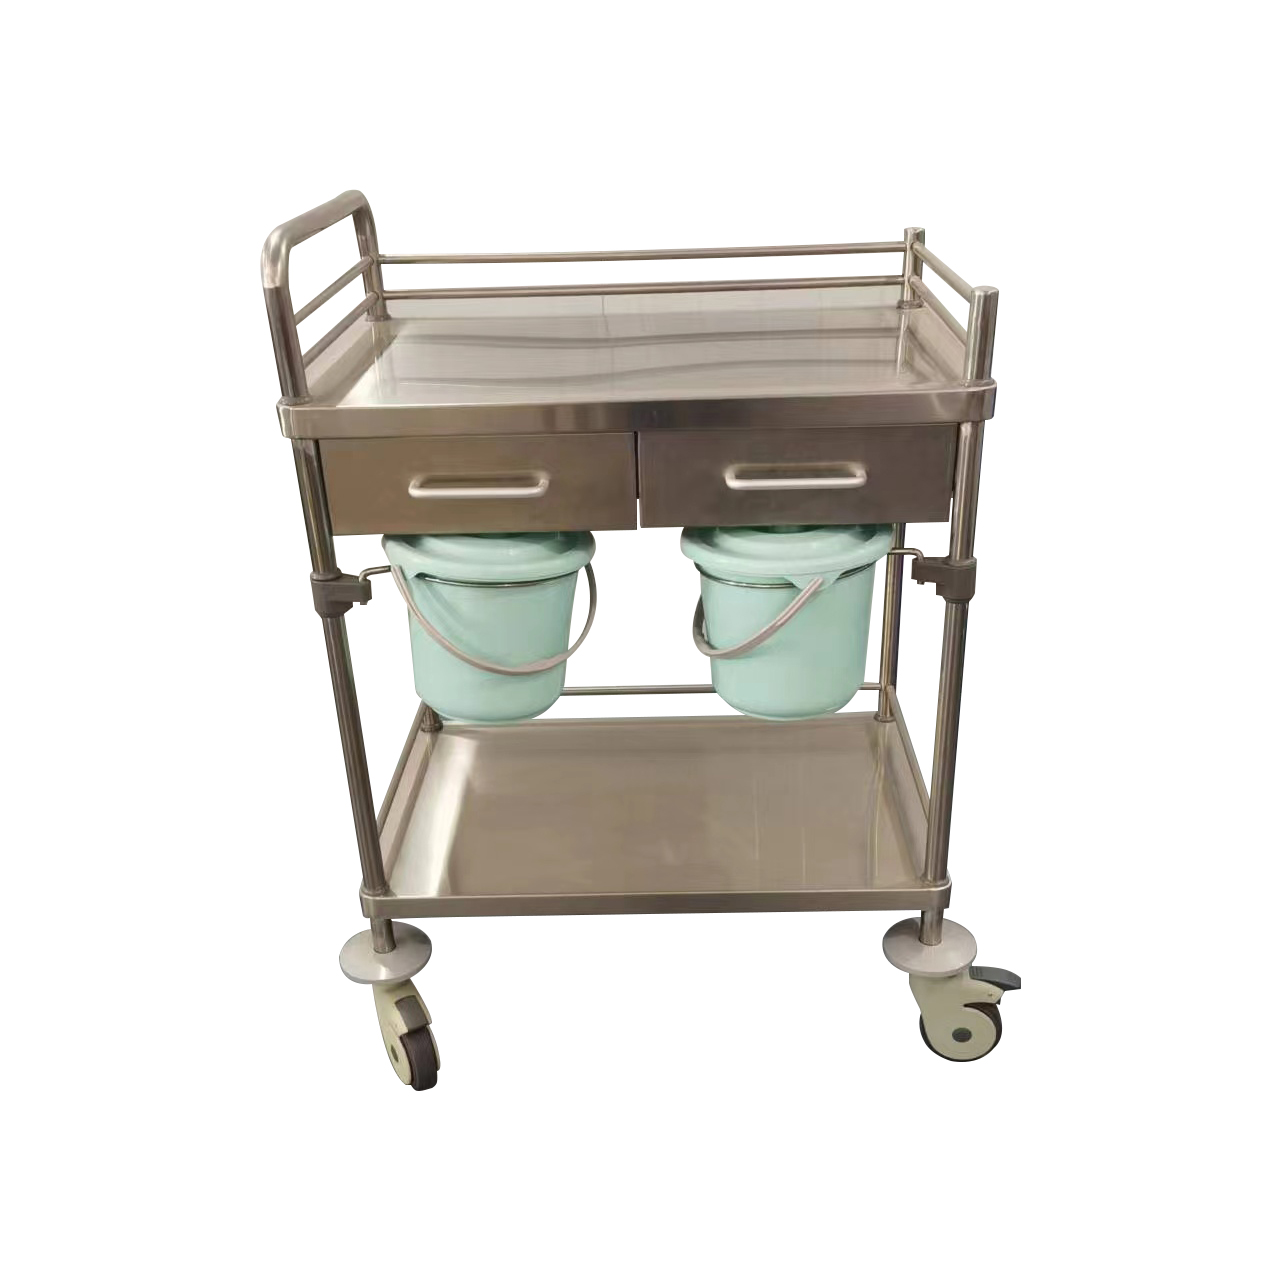 Hospital Surgical Instrument Trolley Stainless Steel Dressing Trolley